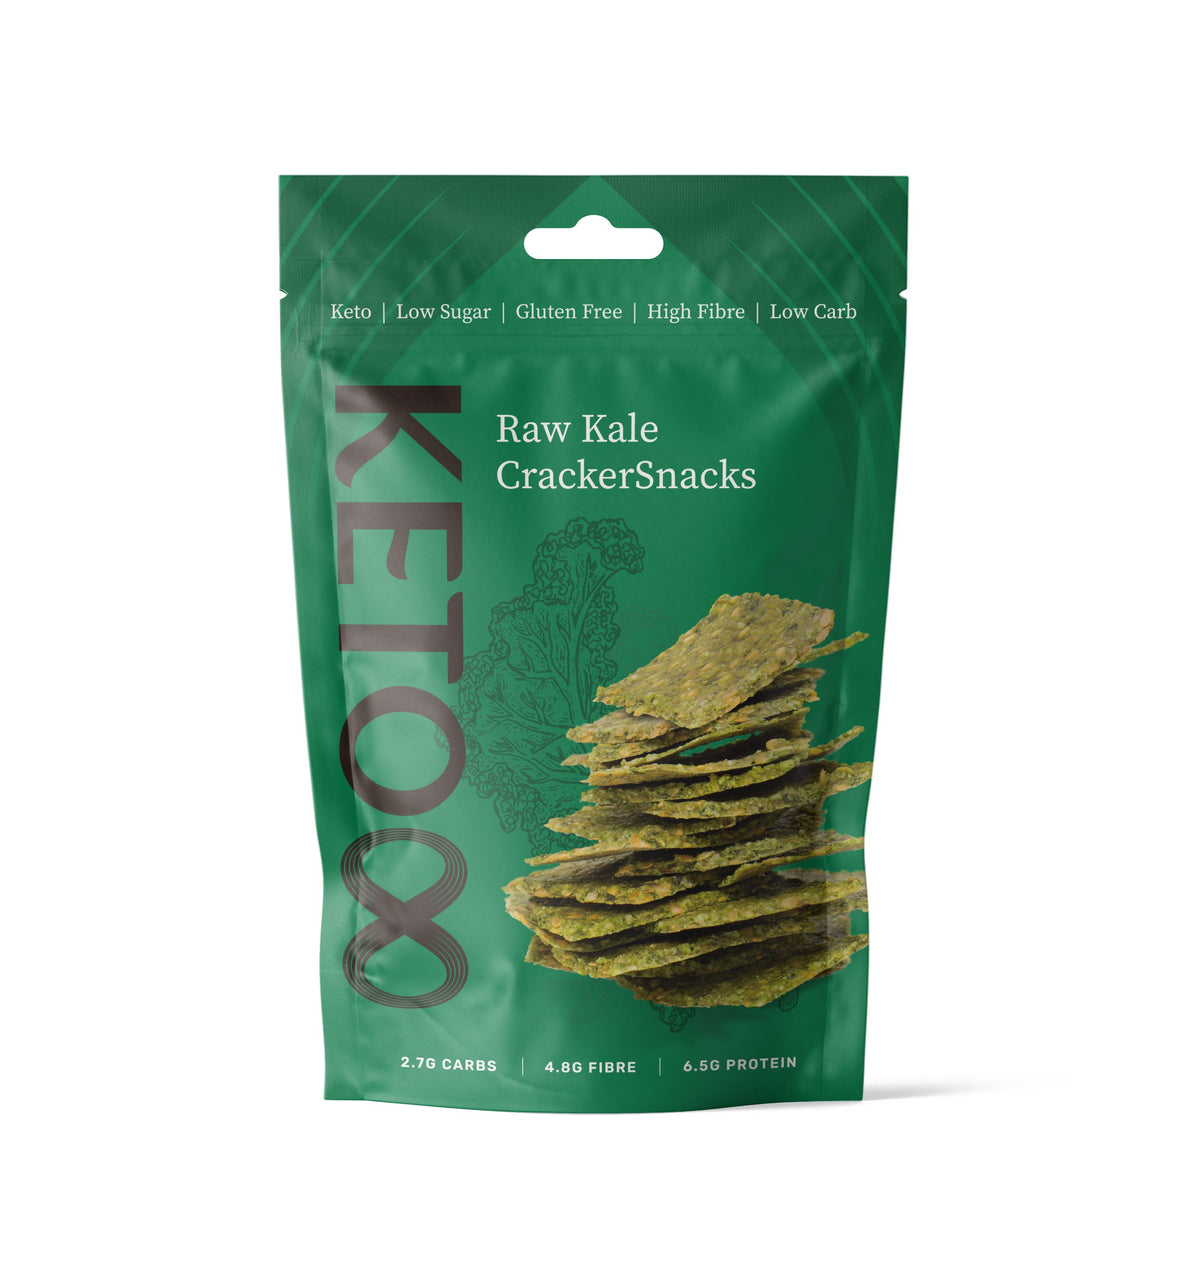 Raw Kale Cracker Snacks (35g) | 8 Foods | Raw Living UK | Eight Foods Raw Kale Cracker Snacks: Cheesy-Tasting, but totally Delicious Dairy-Free Kale Crackers. A Healthy Gluten, Wheat &amp; Refined Sugar-Free Keto Snack.